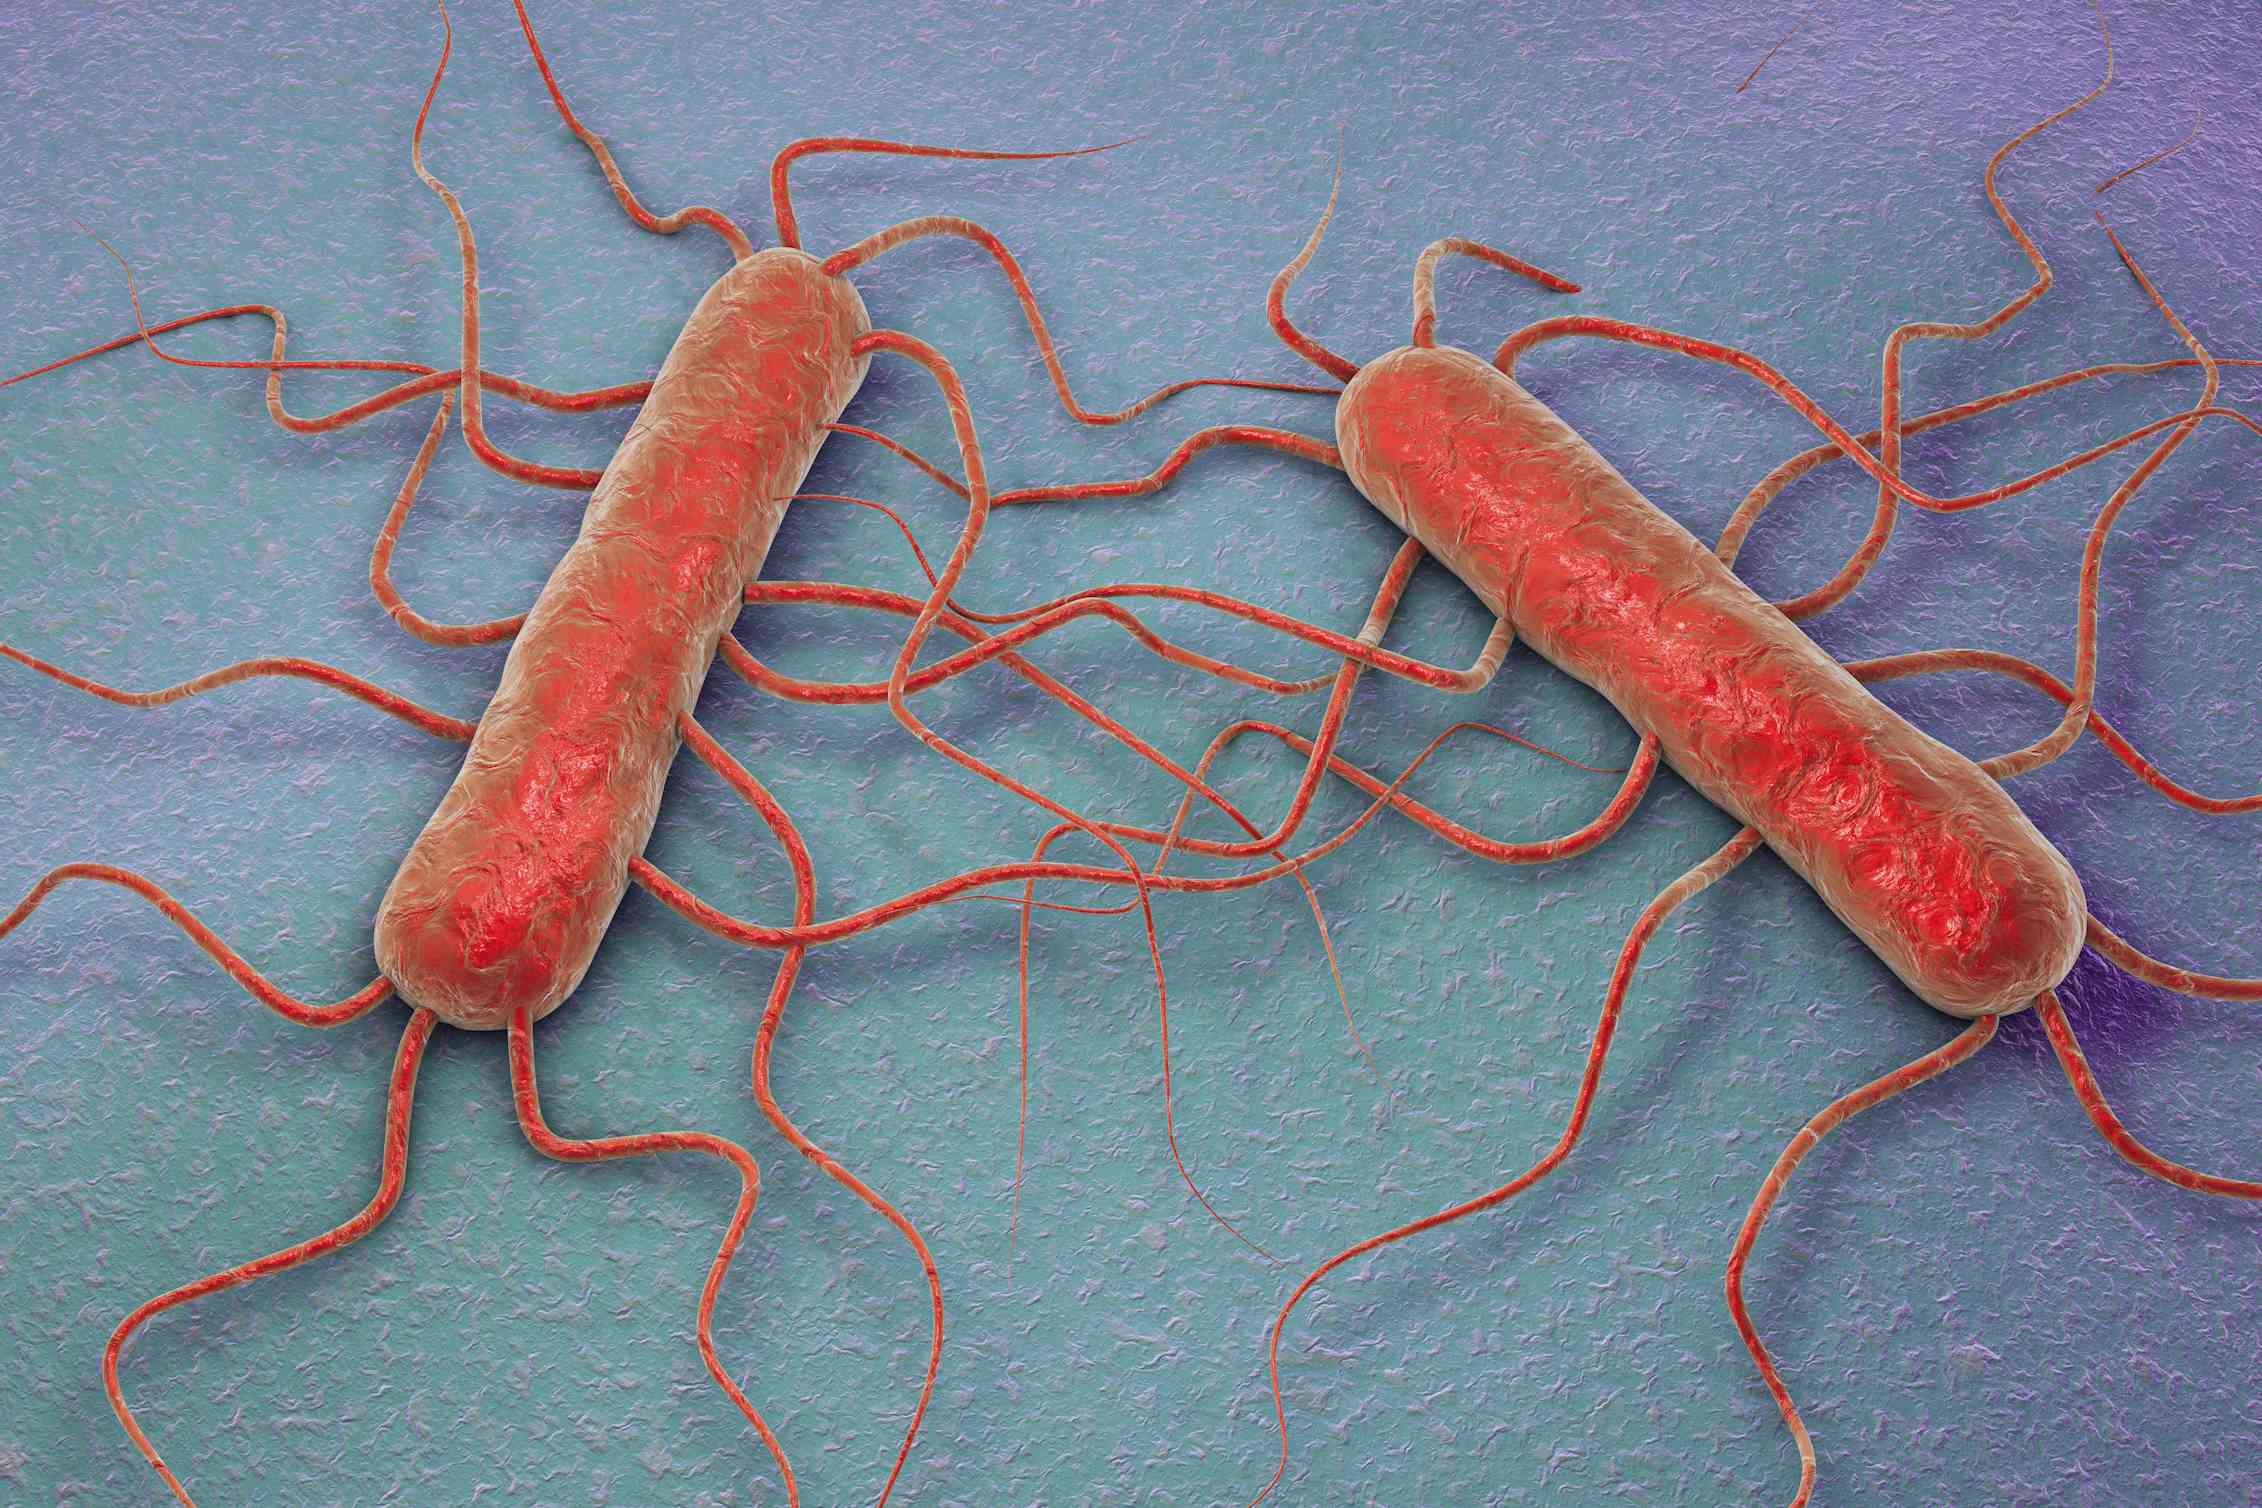 How we can prevent more Listeria deaths